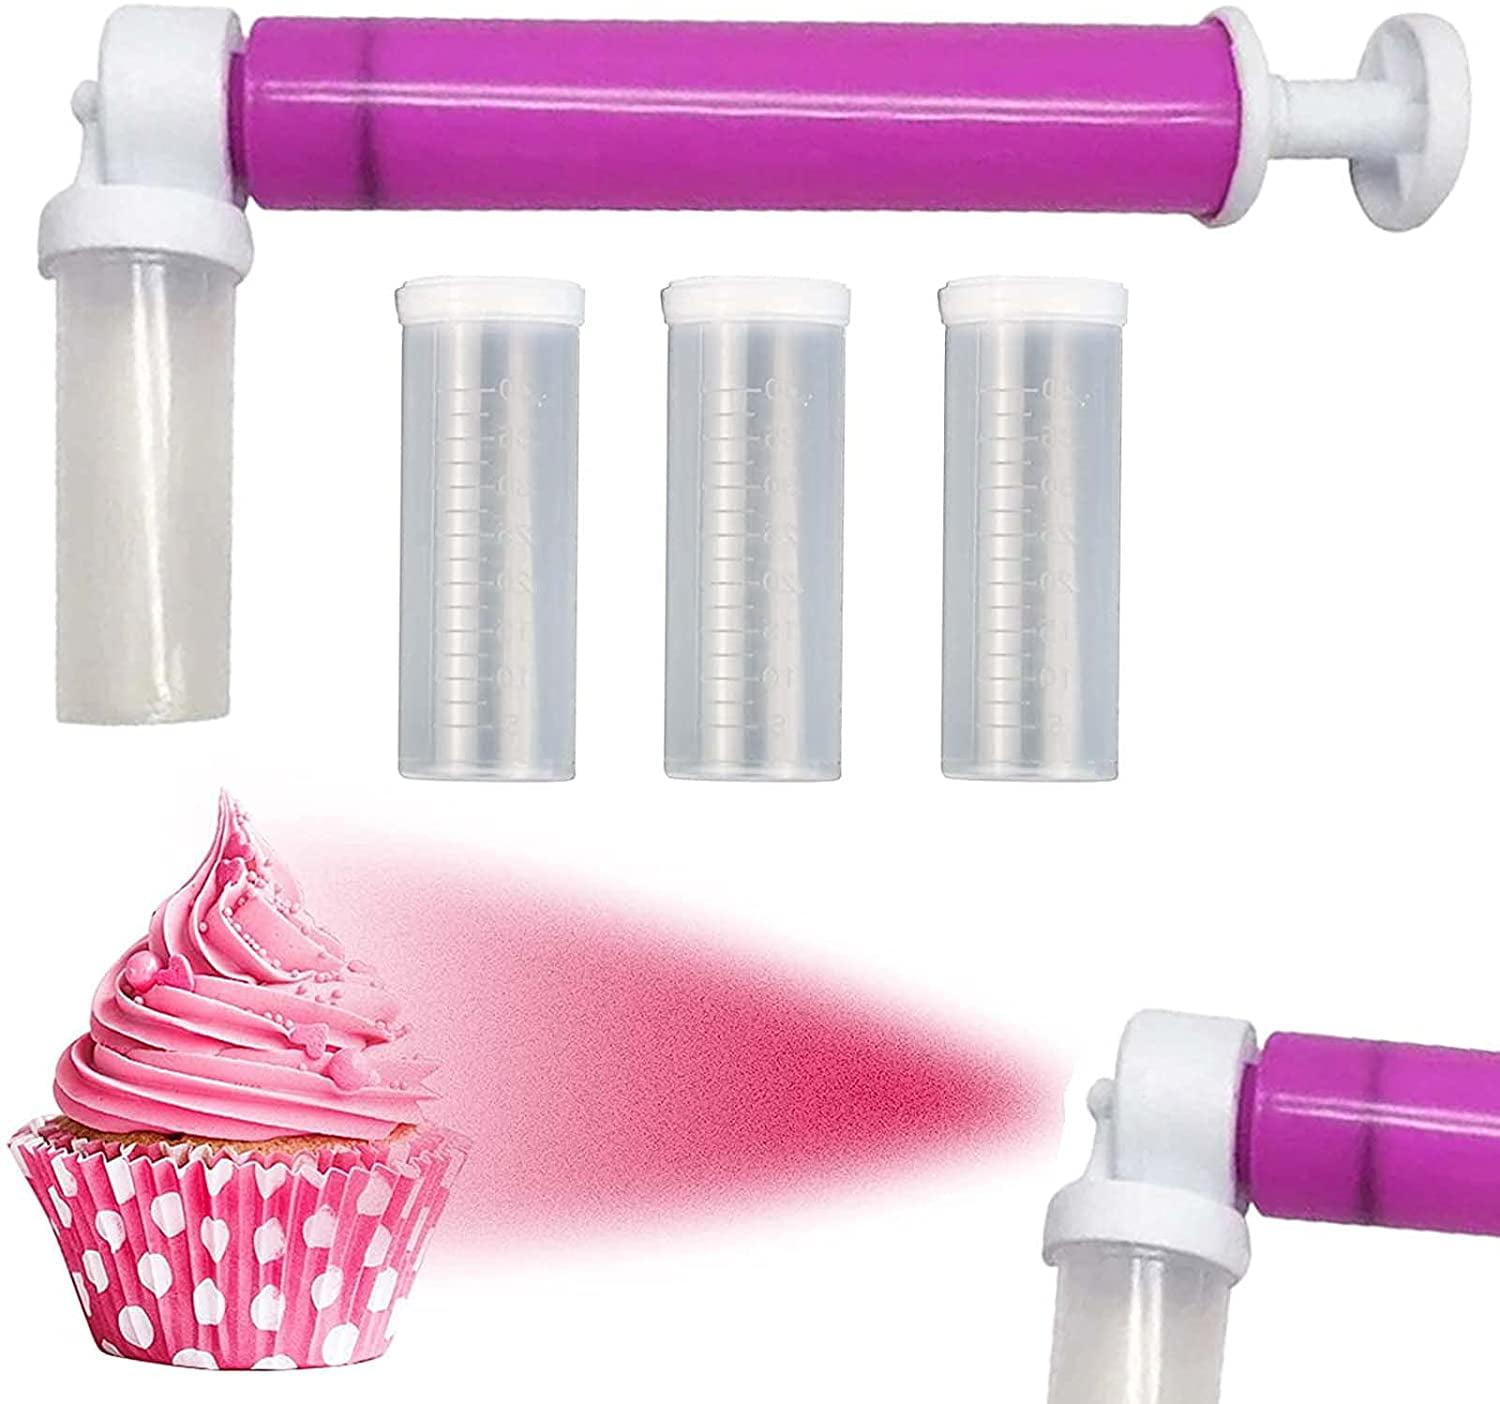 See how our new MANUAL AIRBRUSH SPRAY GUN will make cake and pastry  decorating easy! 🤩♥️, By Gastro Avenue Trading